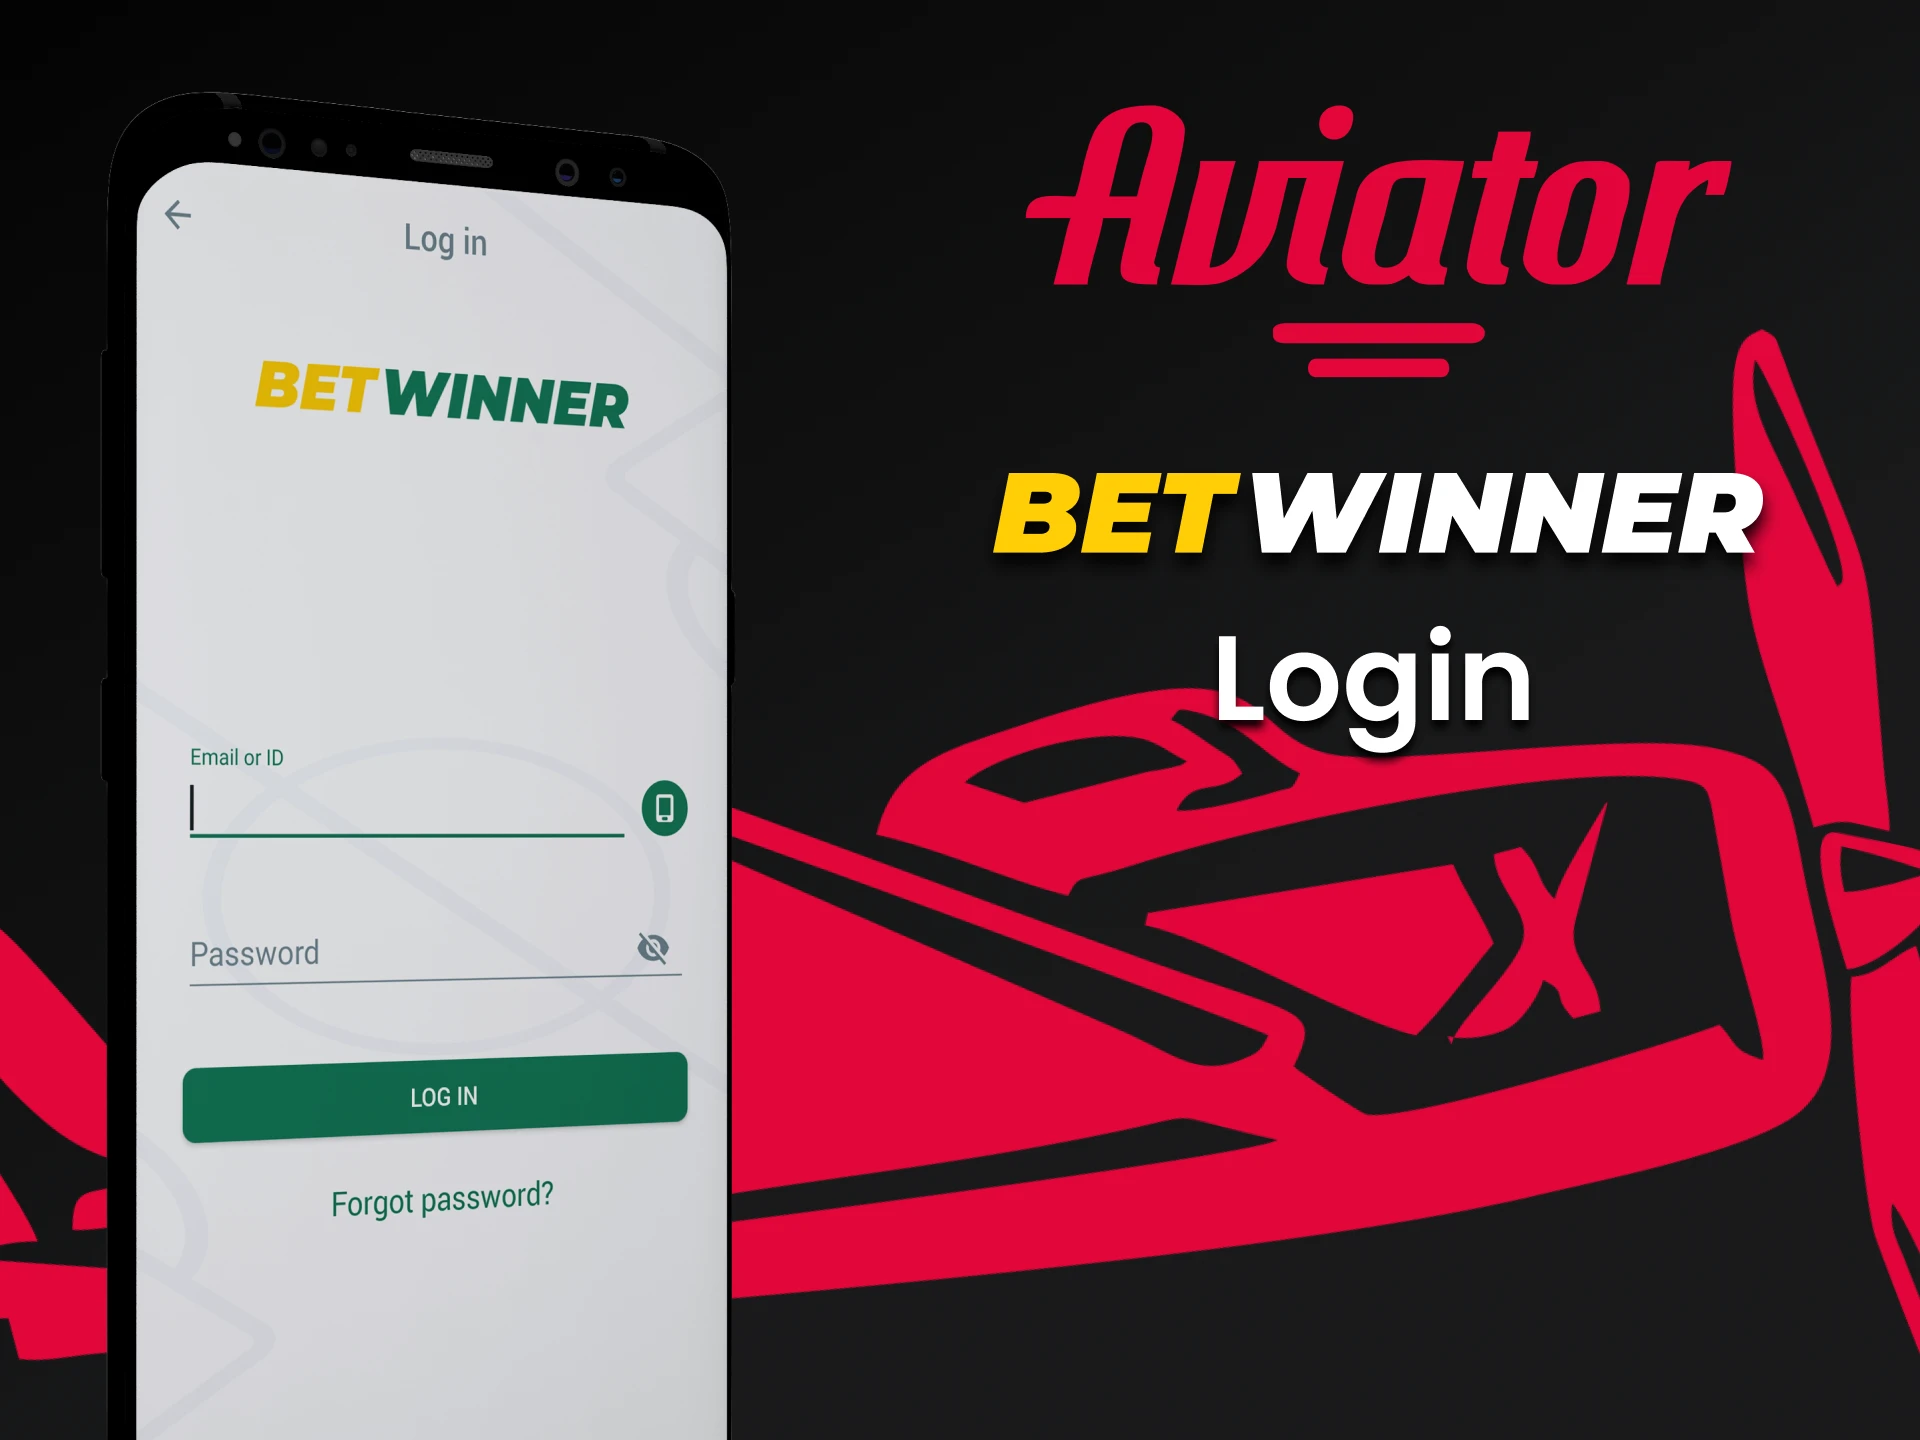 Log in to your personal account through the Betwinner application to play Aviator.